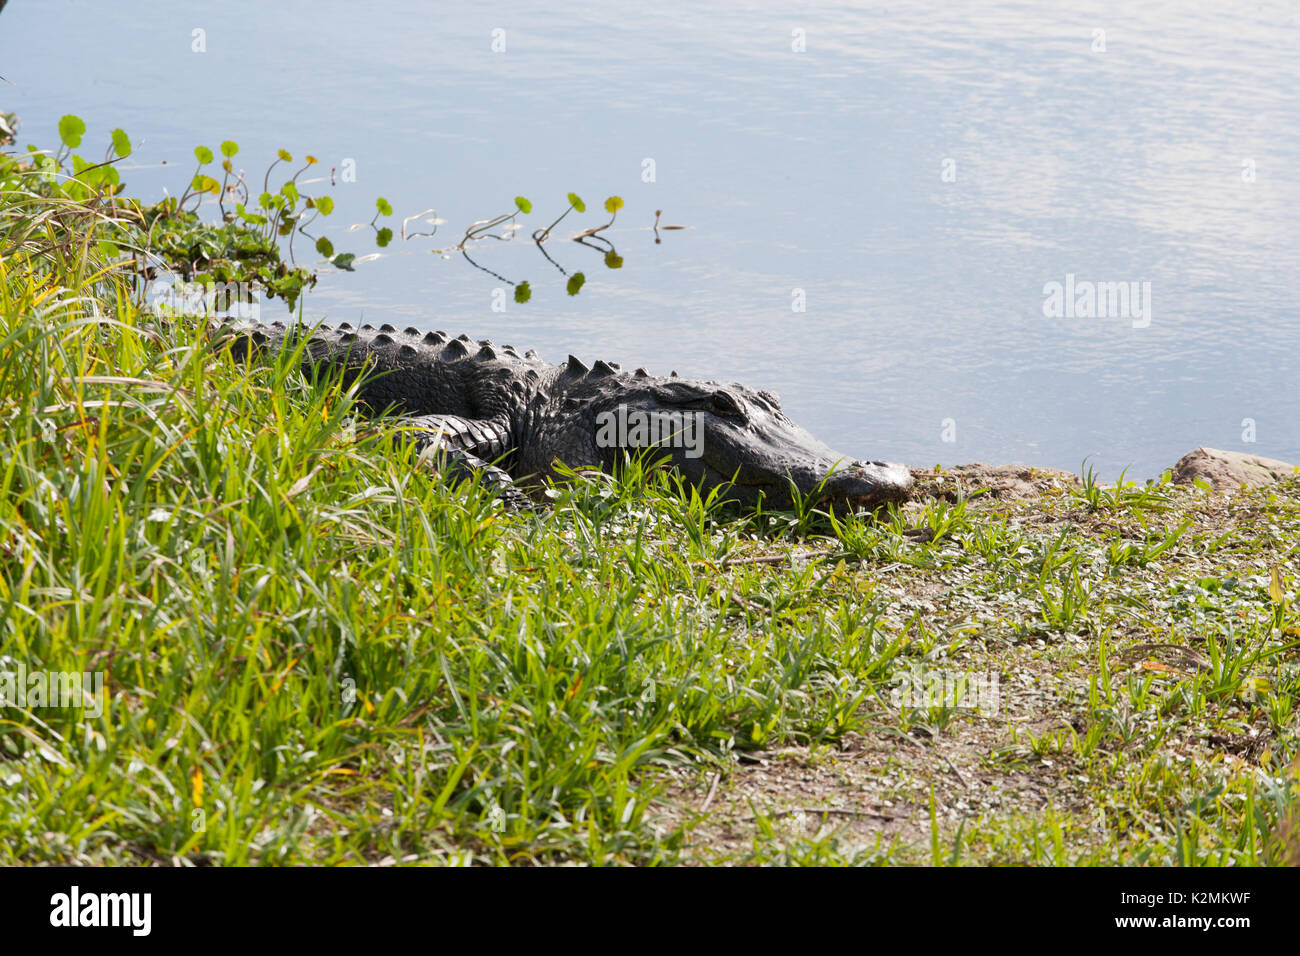 American Alligator(s) basking in the sun at Paynes Prairie Preserve State Park, Florida. Stock Photo